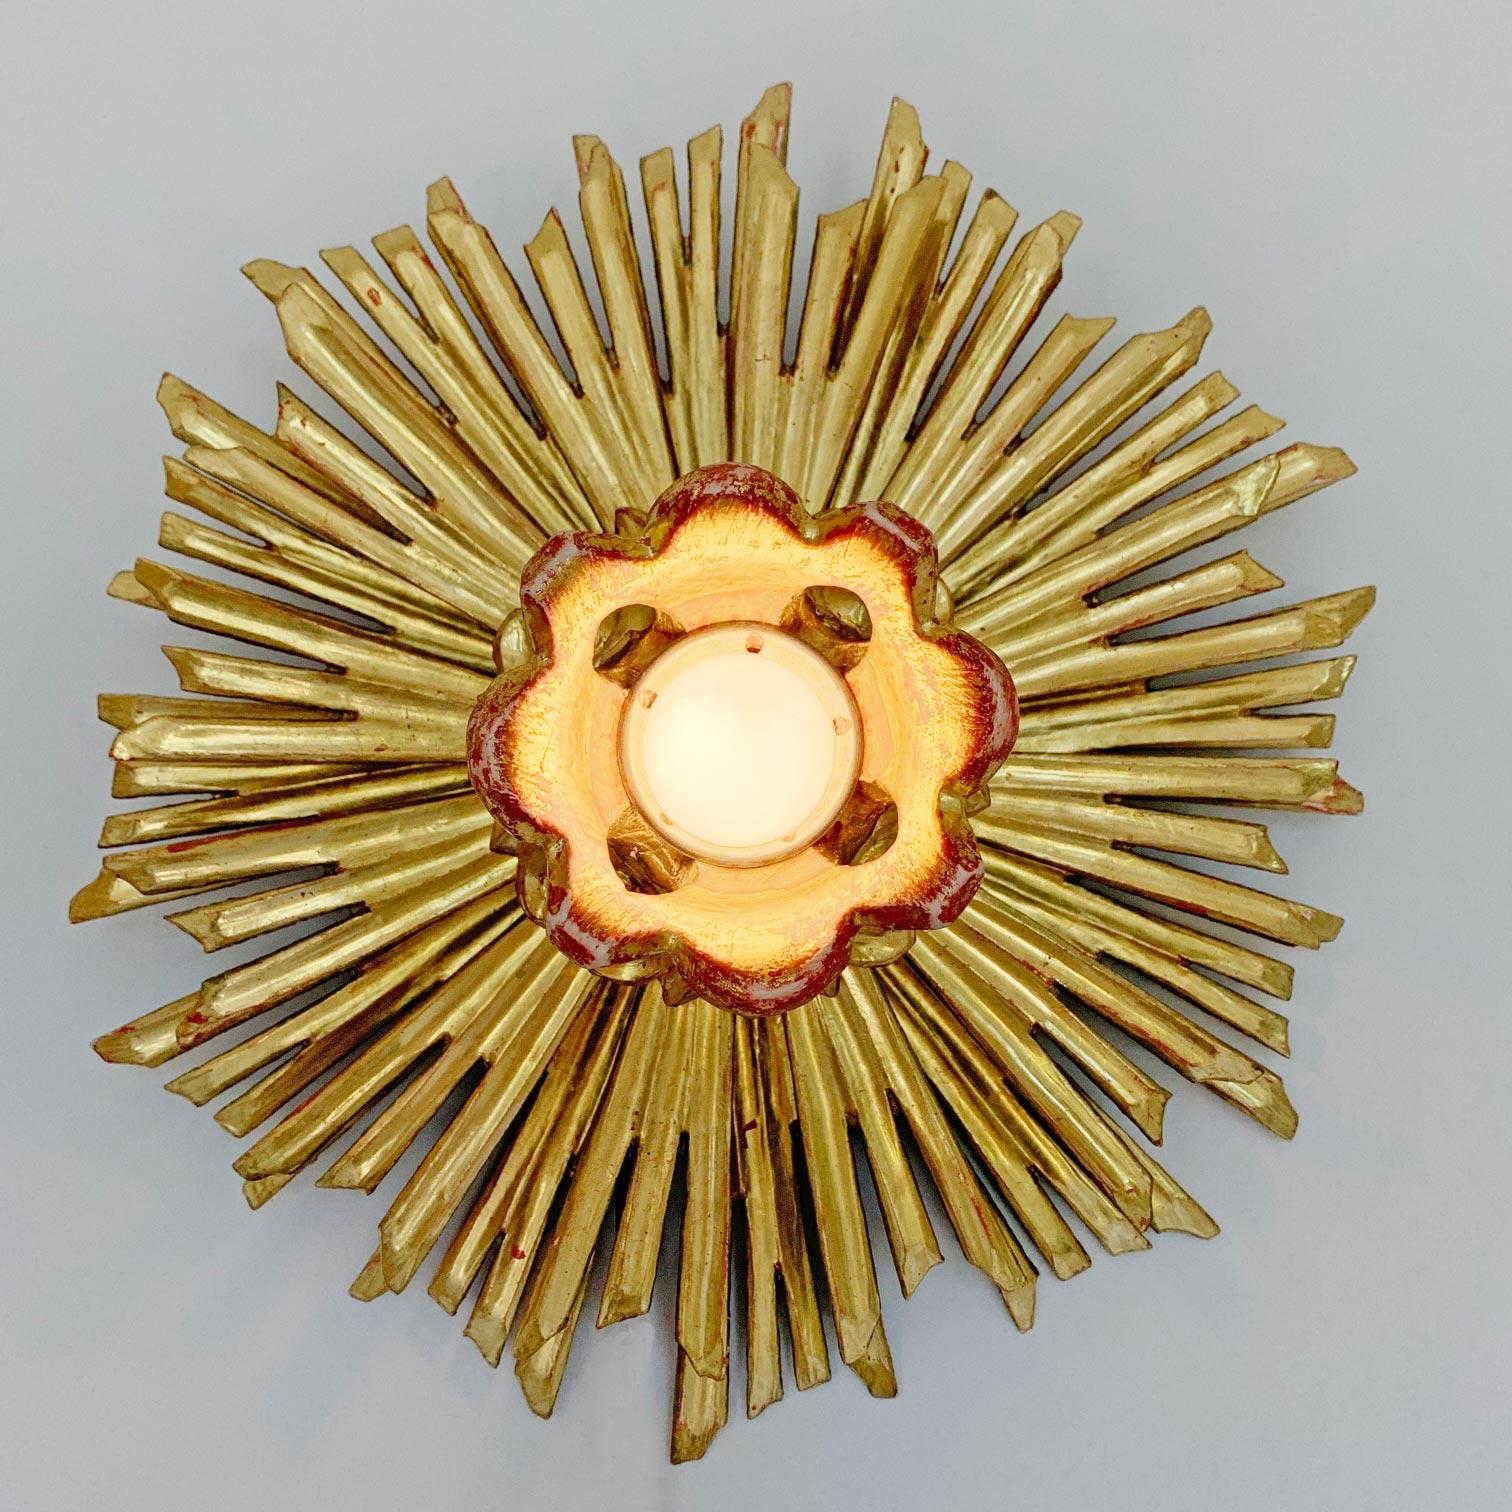 Fabulous 1930's water gilded sunburst flush mount. Carved wooden rays surround the single lamp holder to the centre, originally from a church in Germany this piece is in absolutely glorious condition, the bright gold gilding is superb.

These